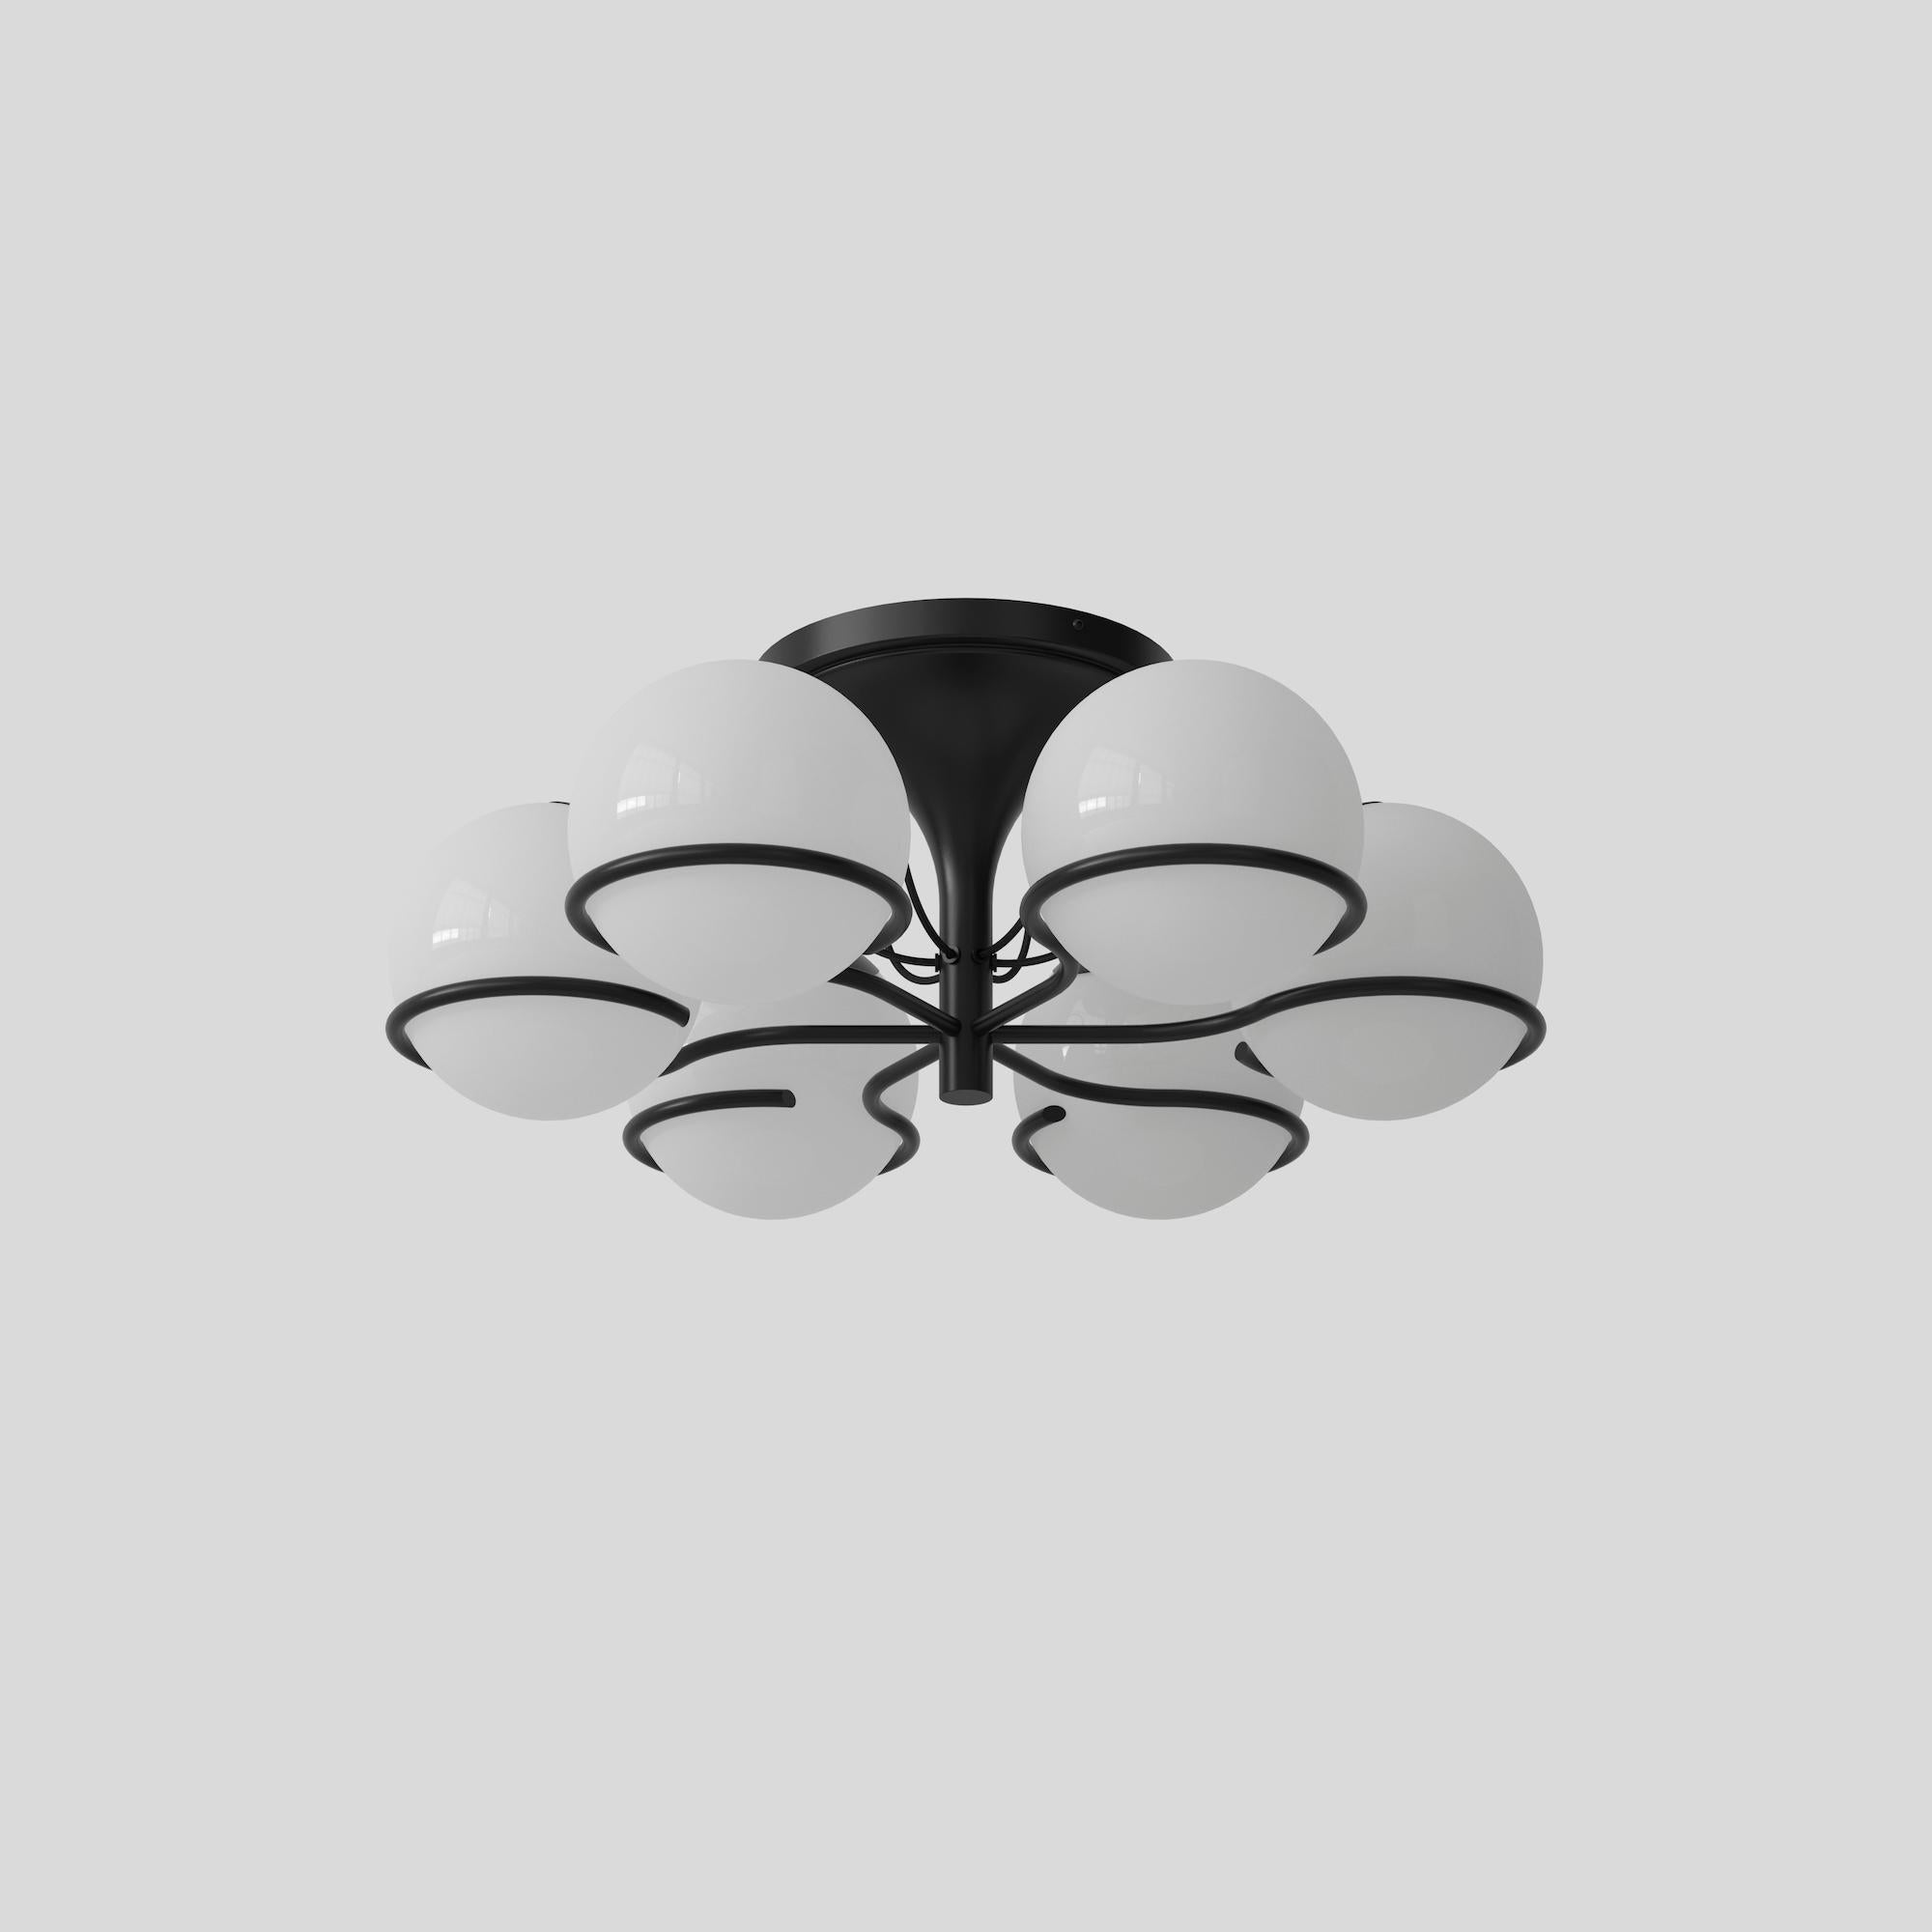 Model 2042/6 flush mount ceiling light. Originally designed in 1963 by Gino Sarfatti. Current production designed and manufactured in Italy by Astep. Brushed champagne finish. Also available in black painted steel finish. Wired for U.S. standards. A